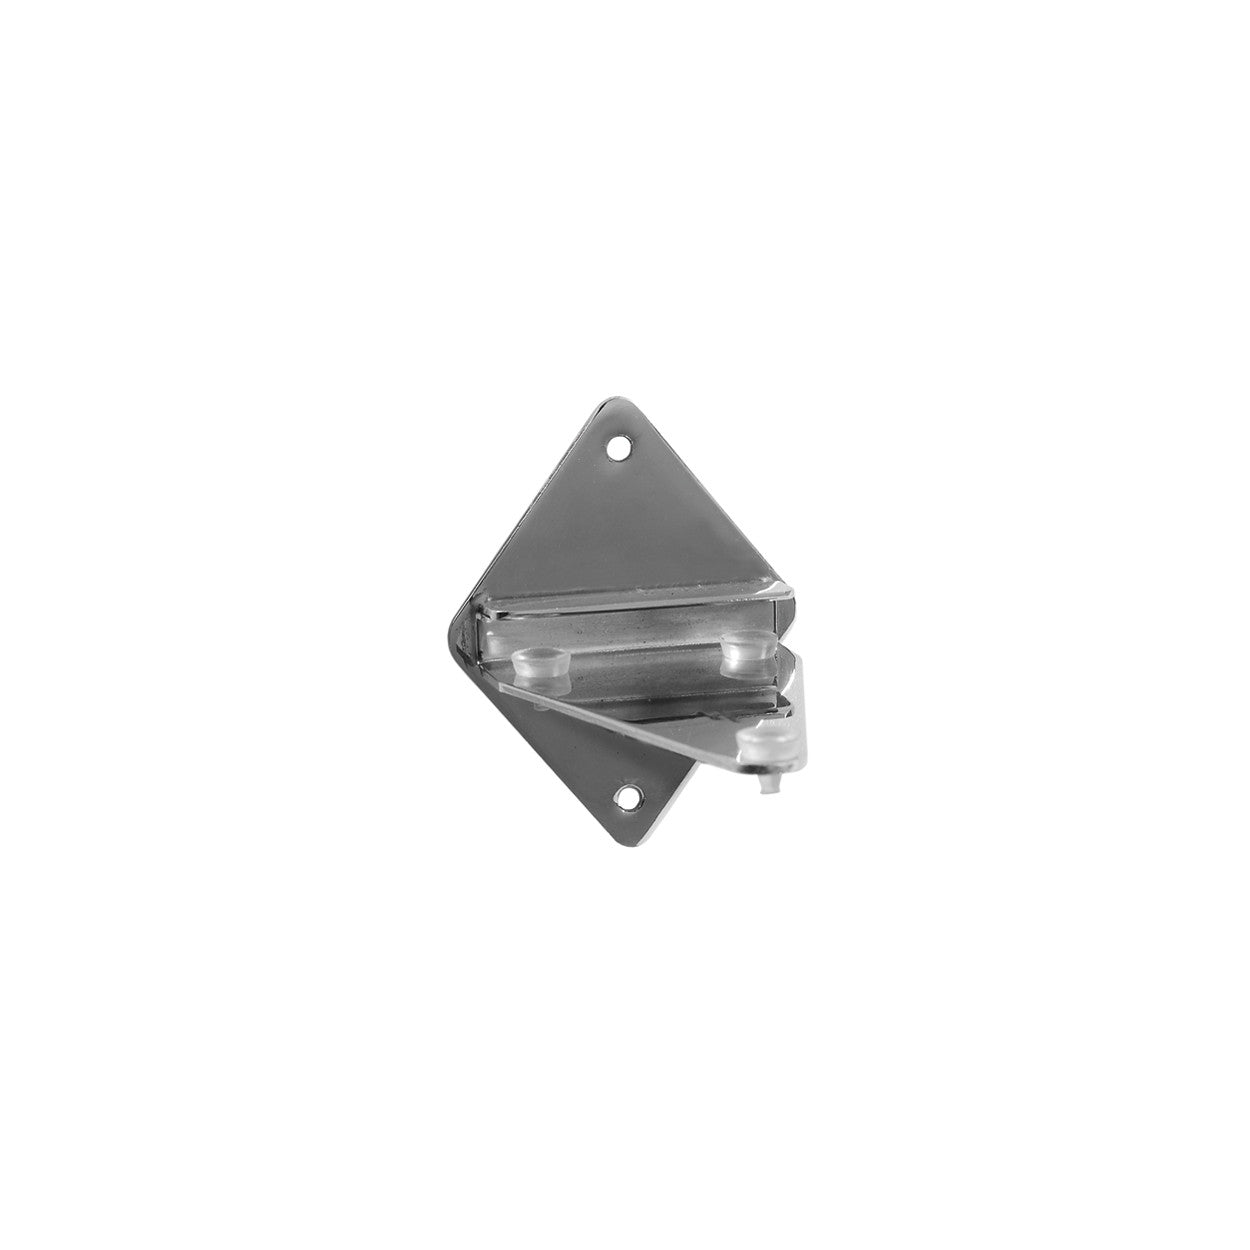 Wall Mount Cantilever Bracket - L95 x H75 Plate